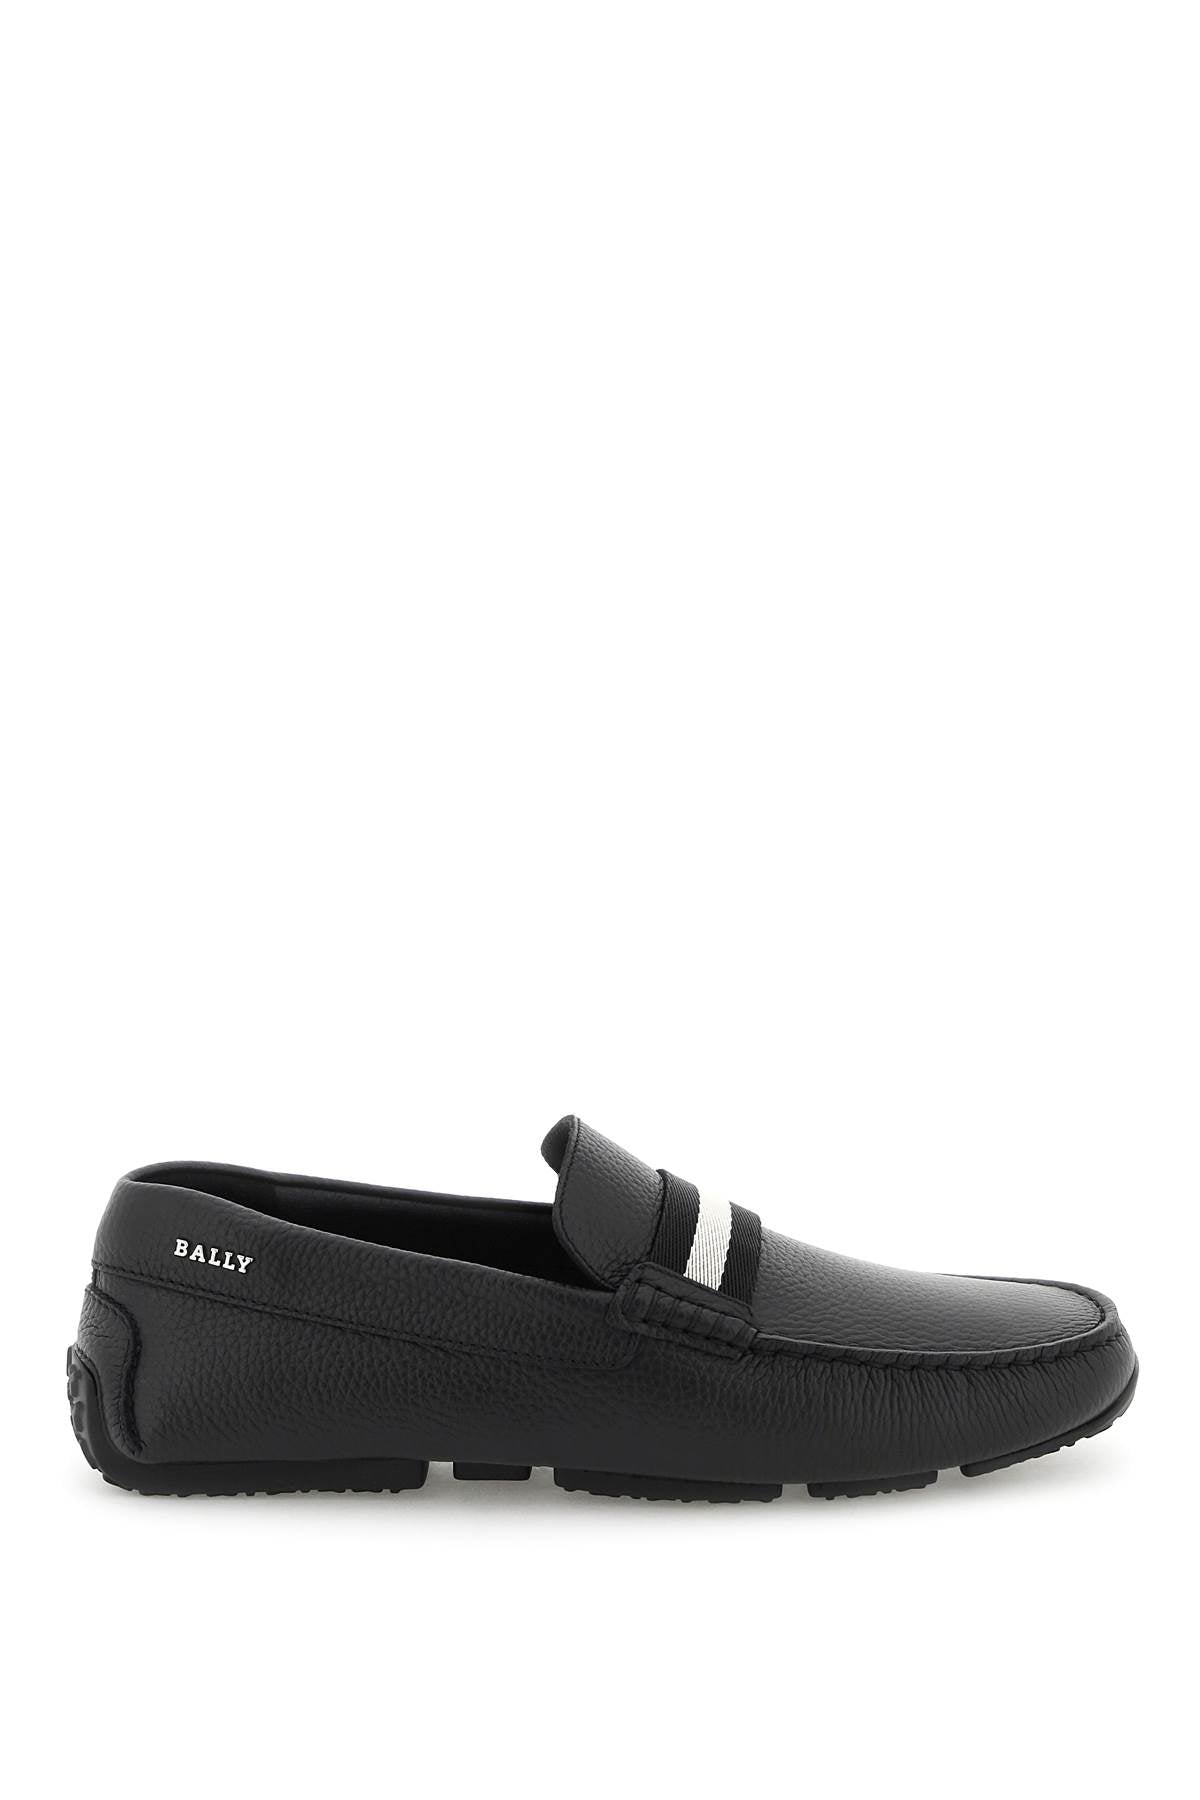 Bally 'pearce' loafers 585330 BLACK